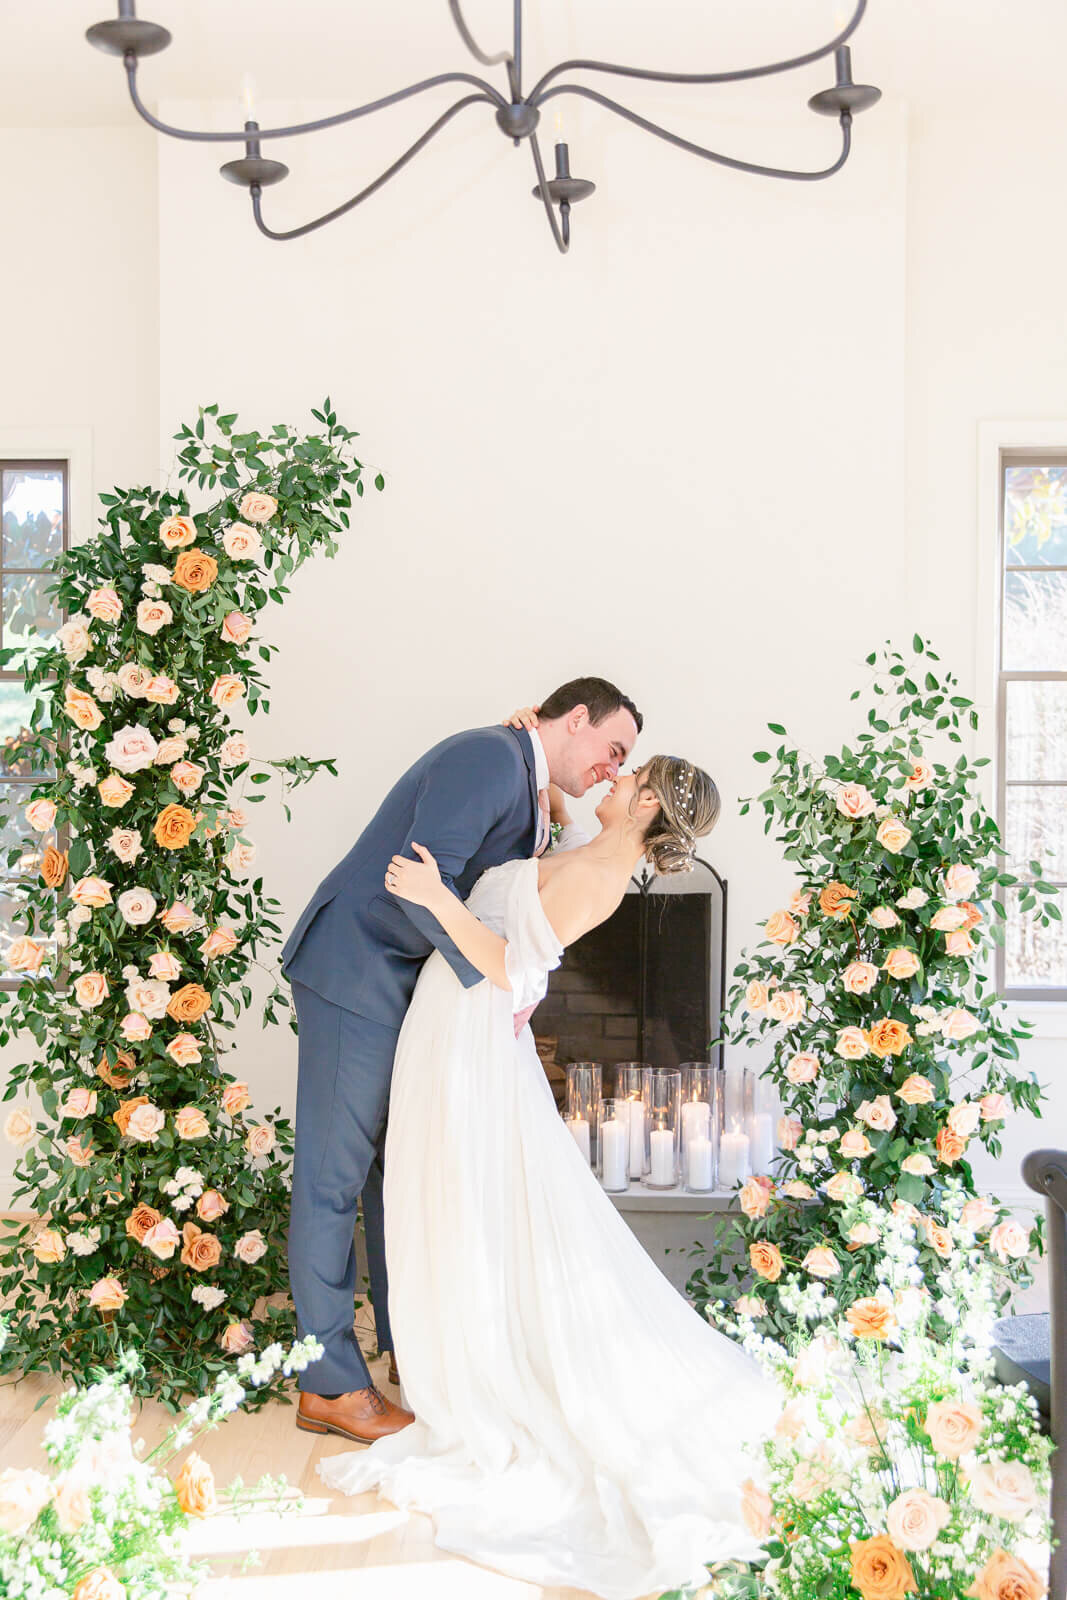 Handsome groom dips bride surrounded by gorgeous florals in front of a fireplace at Hemlock Hospitality, a beautiful Virginia wedding venue. Captured by Bethany Aubre Photography.